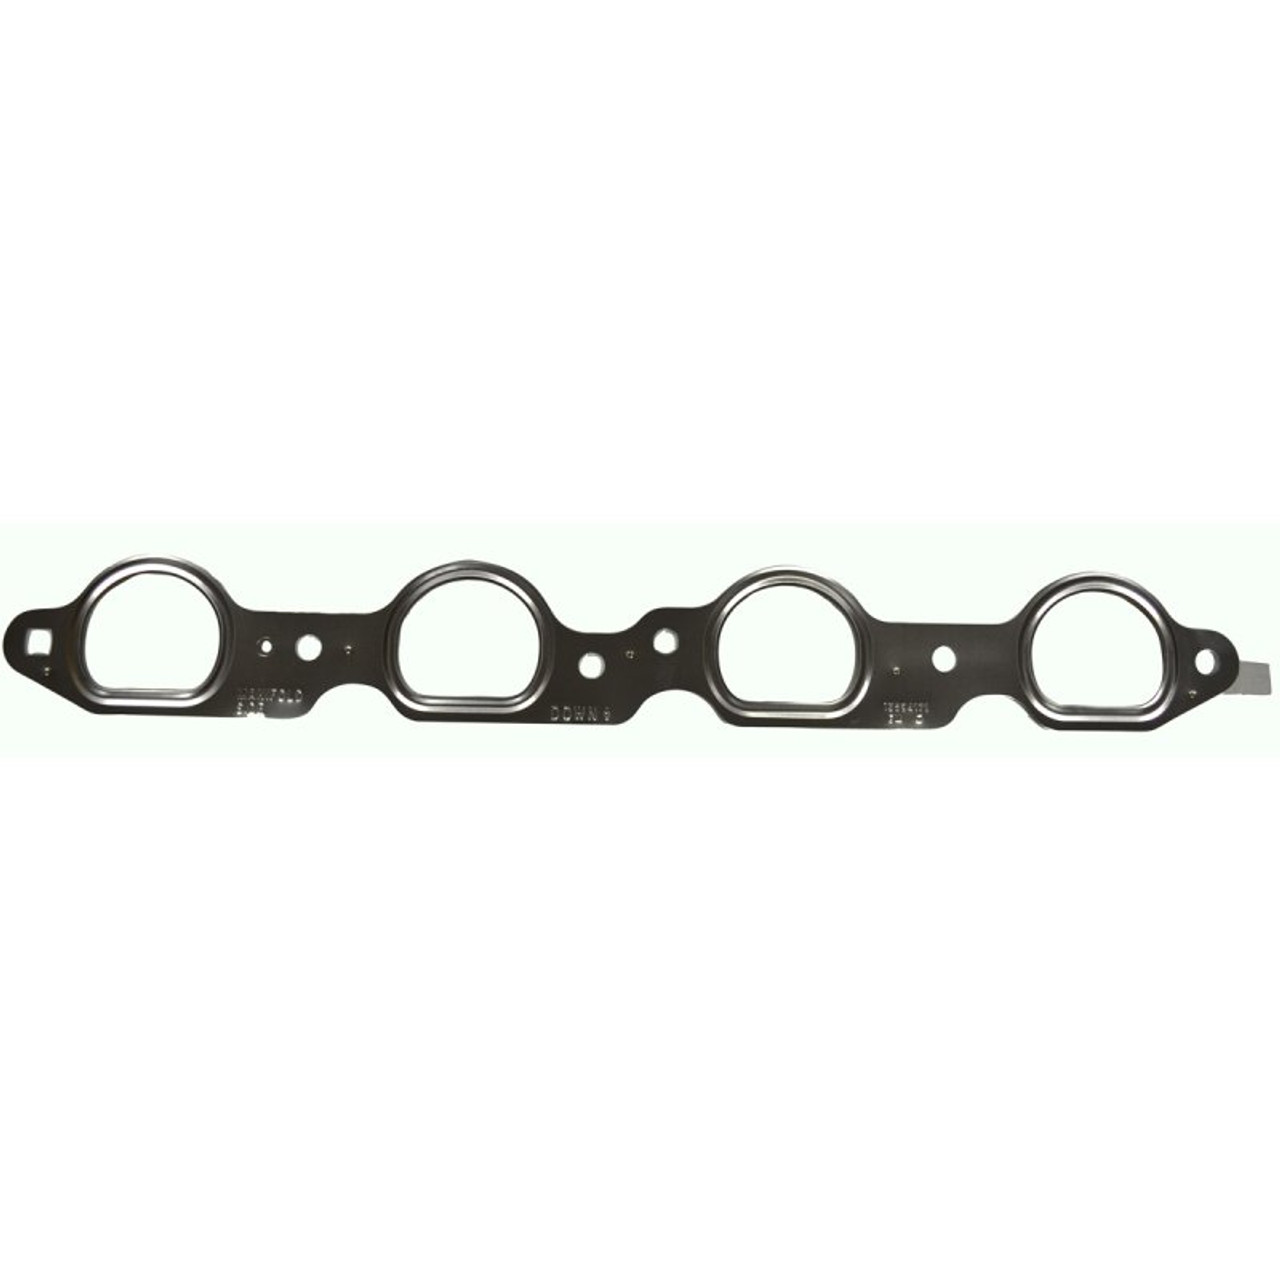 GM Exhaust Manifold Gasket for LS7 (1 Gasket) Tick Performance, Inc.